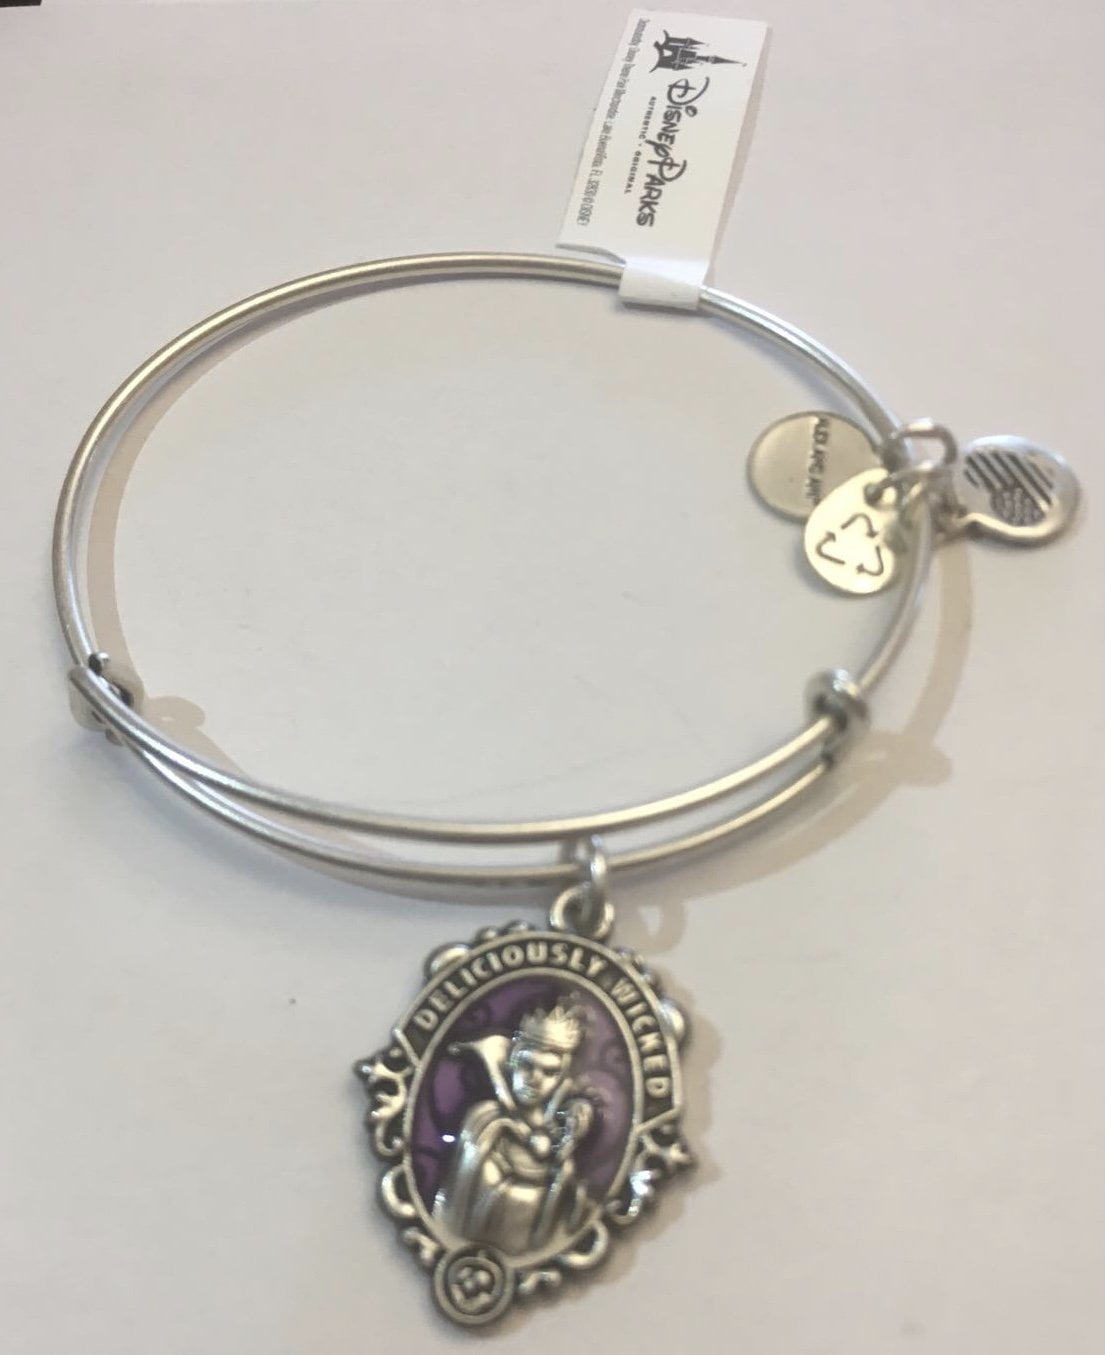 NEW Disney ALEX AND ANI Evil Queen "Deliciously Wicked" Silver Bangle Bracelet 